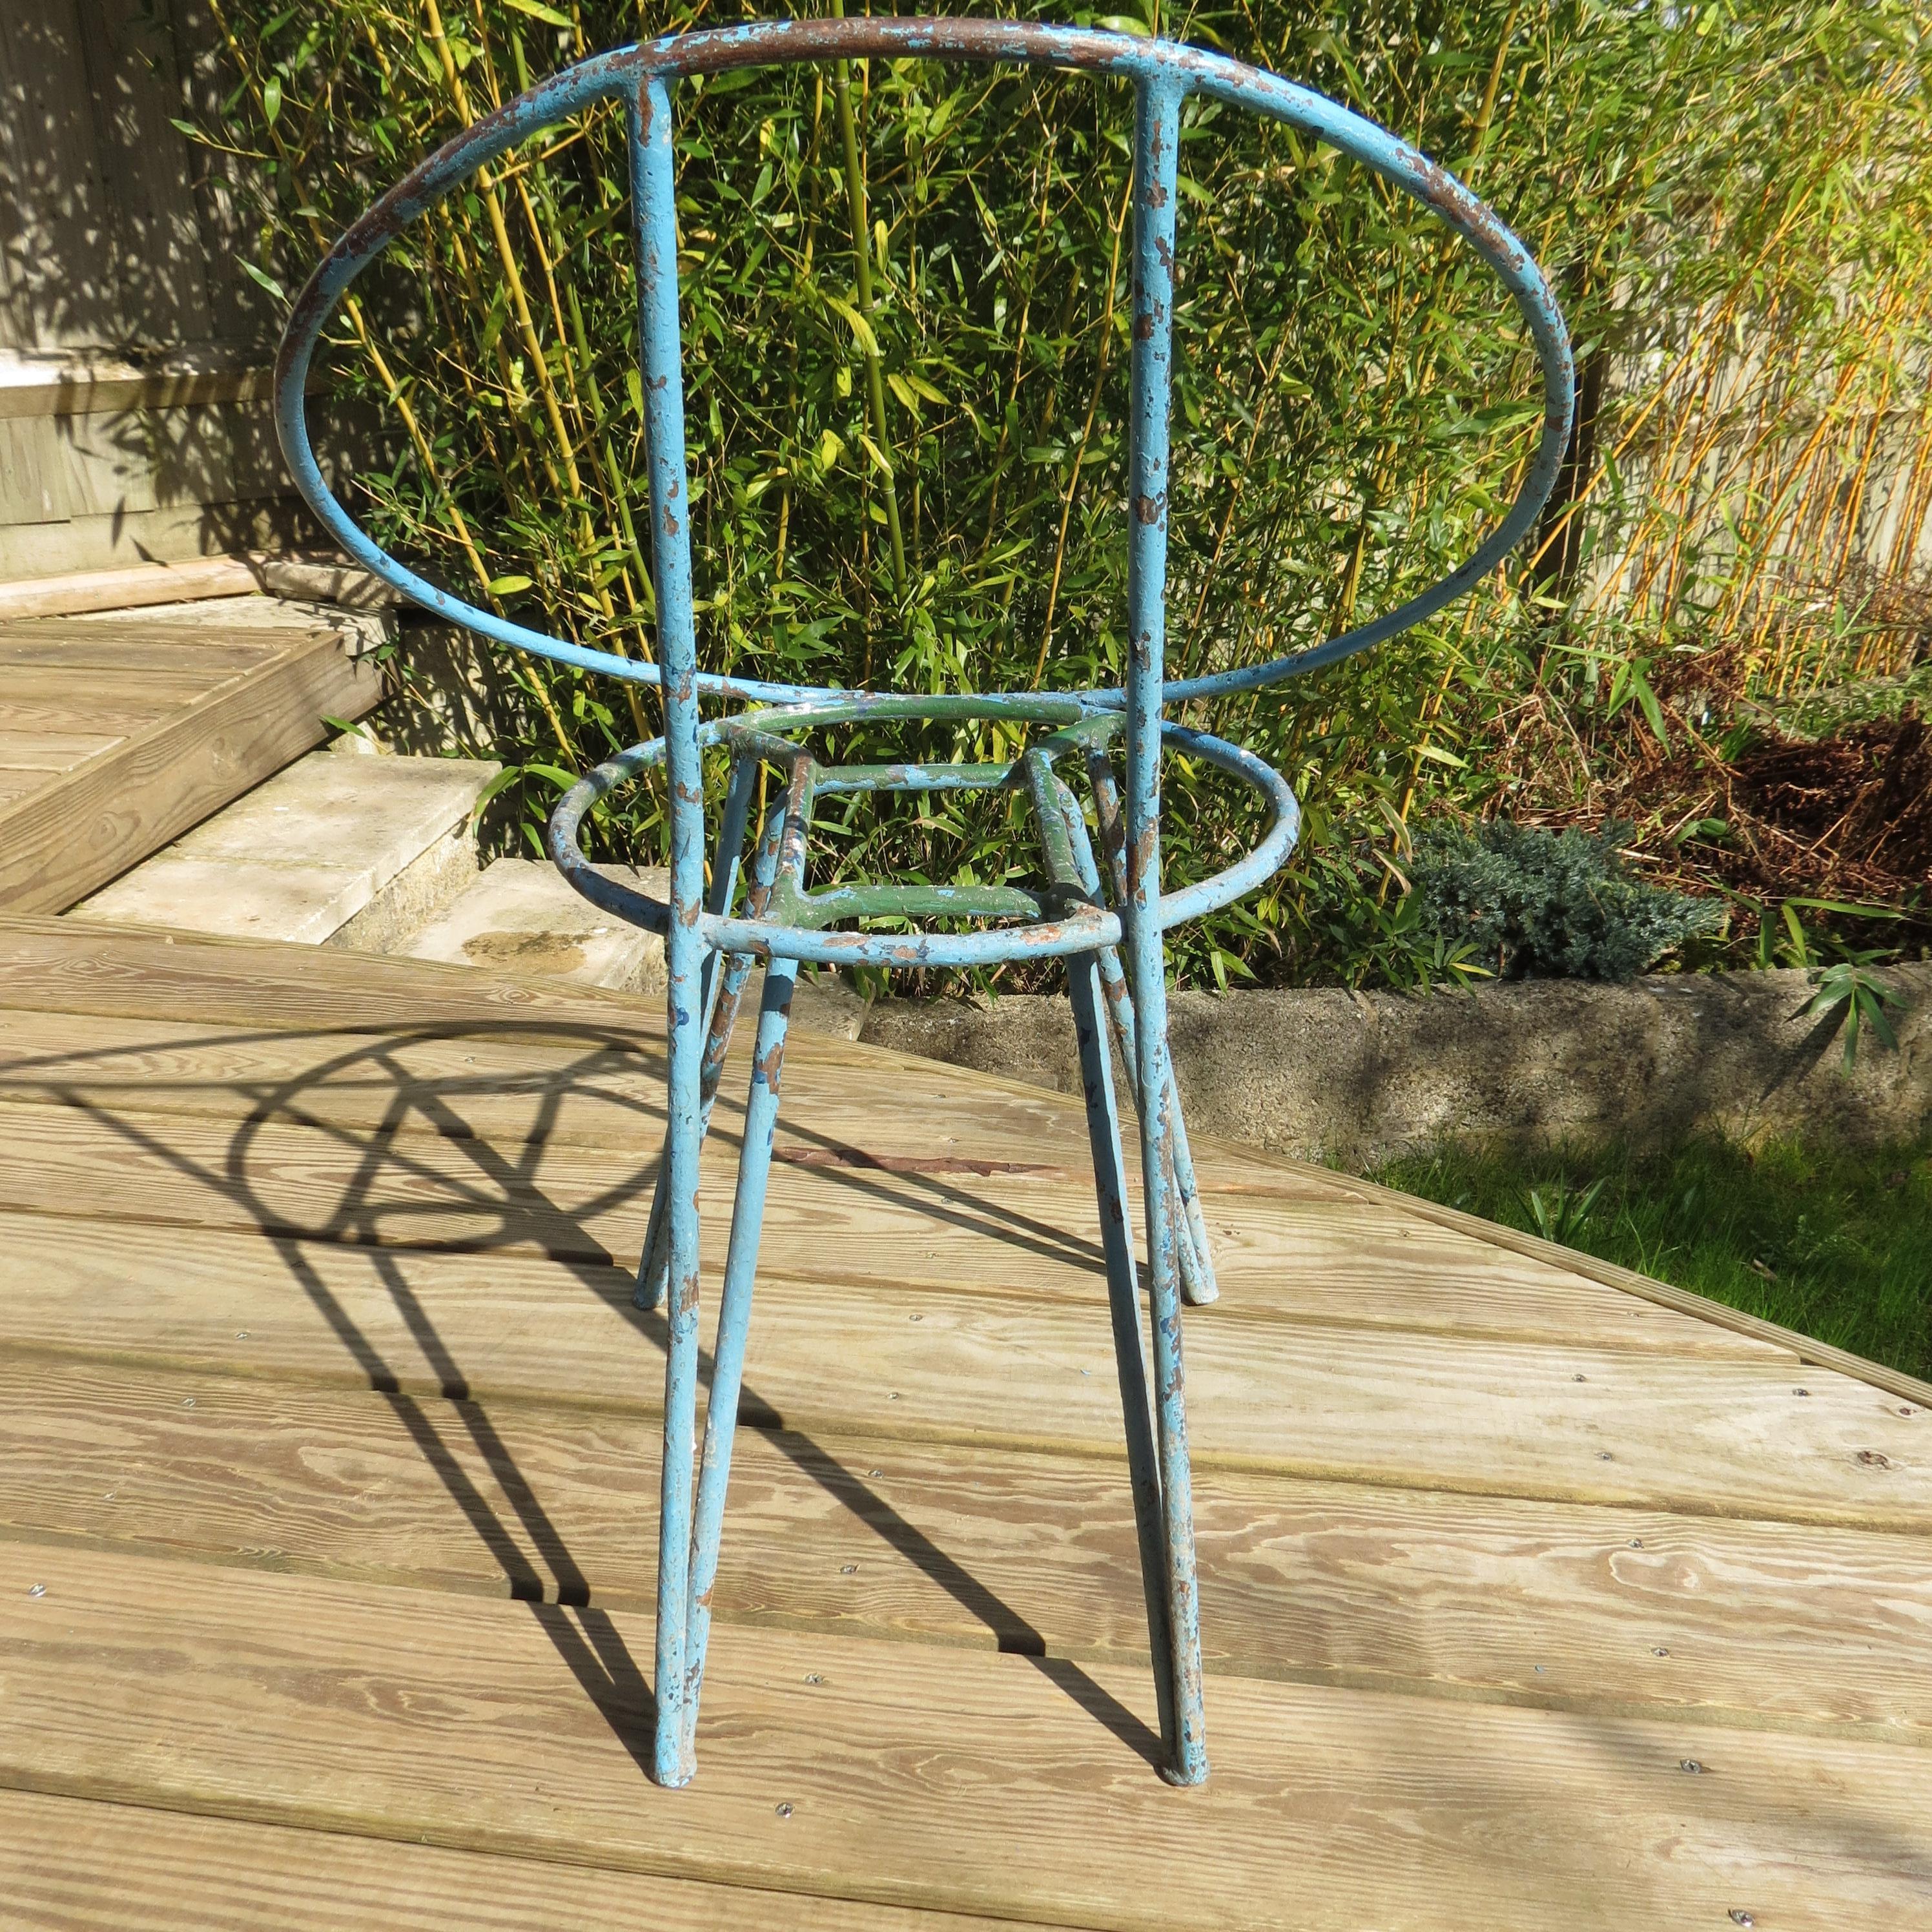 Machine-Made Set of 4 Metal Garden Chairs from the 1950s